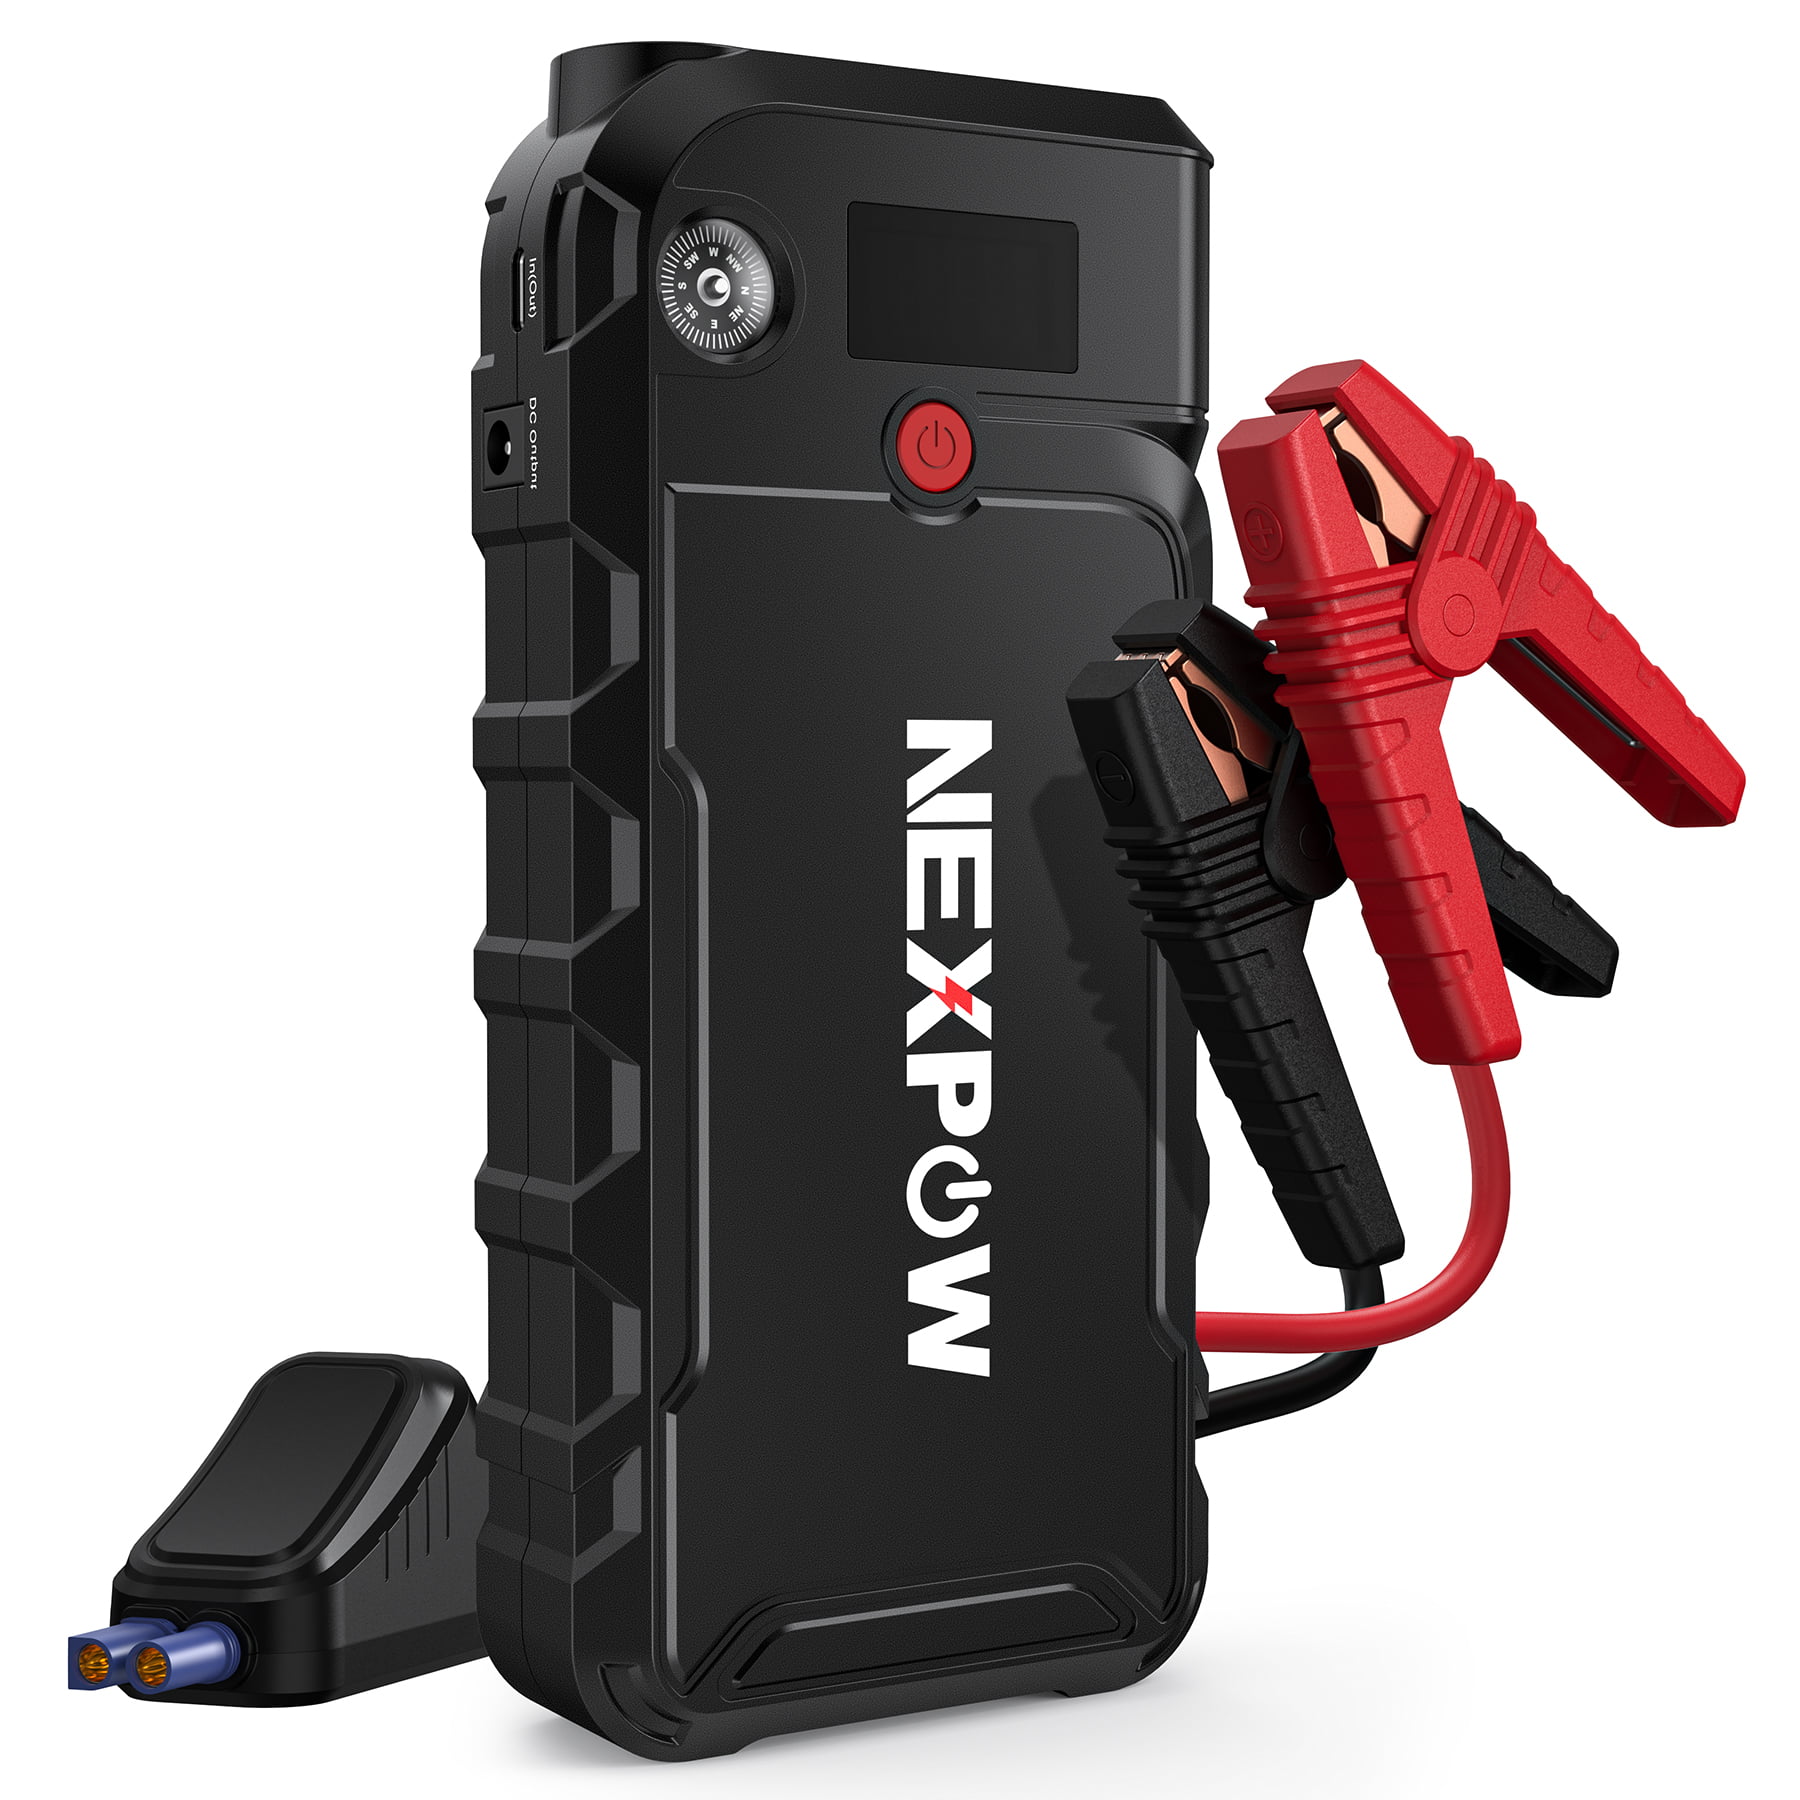 NEXPOW Battery Jump Starter - 3000A Peak 23800mAH Car Jump Starter (up to  9.0L Gas or 8.5L Diesel Engine) - 12V Portable Battery Booster with LCD  Display